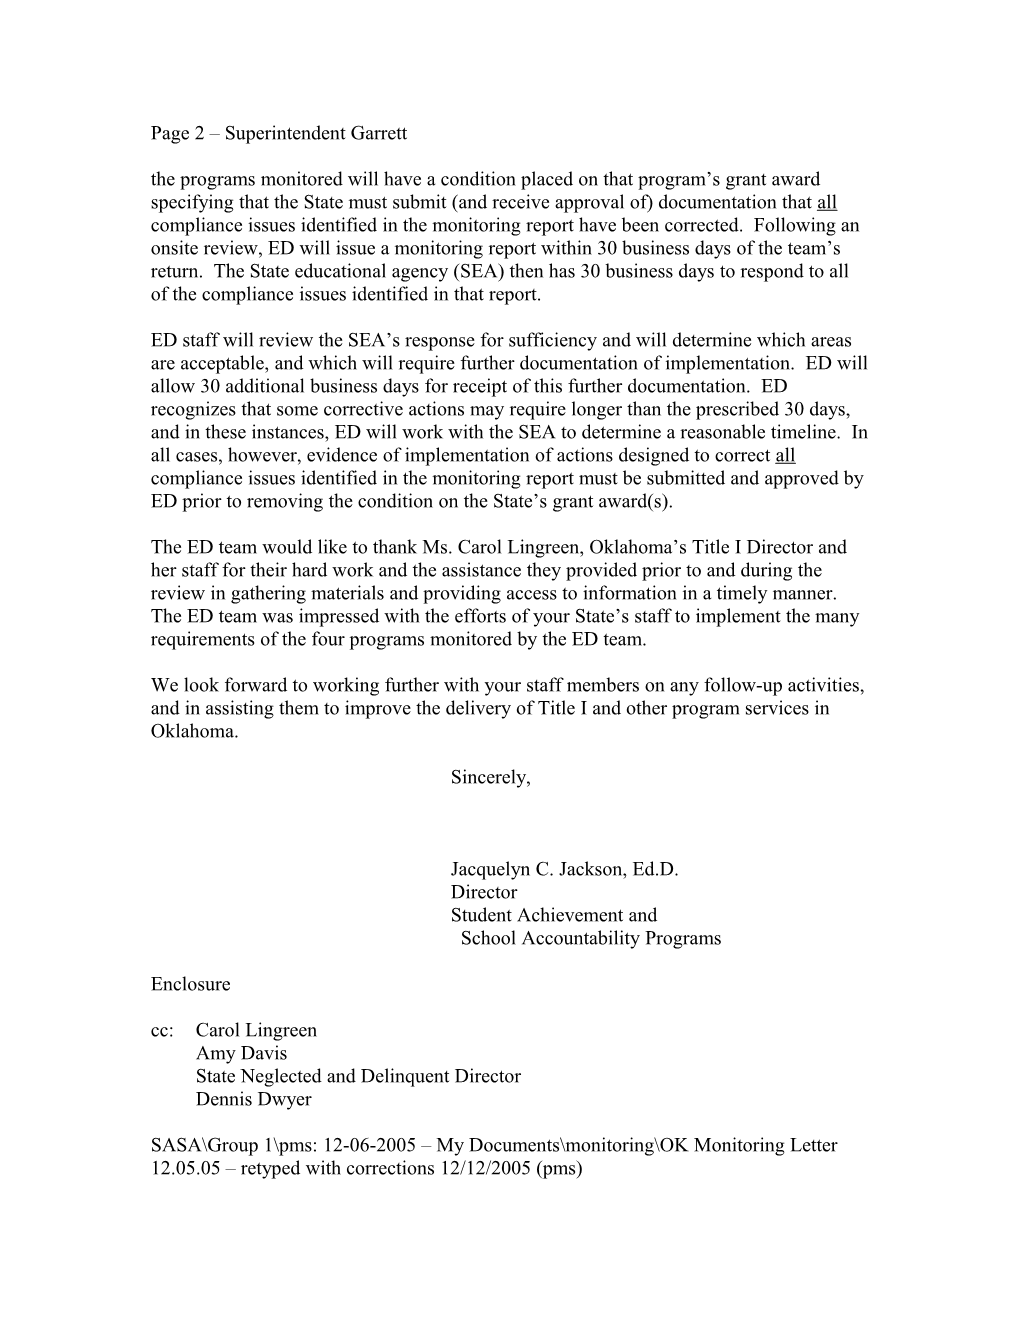 Letter Re USDE Monitoring Visit to Oklahoma During October 2005 (MS WORD)